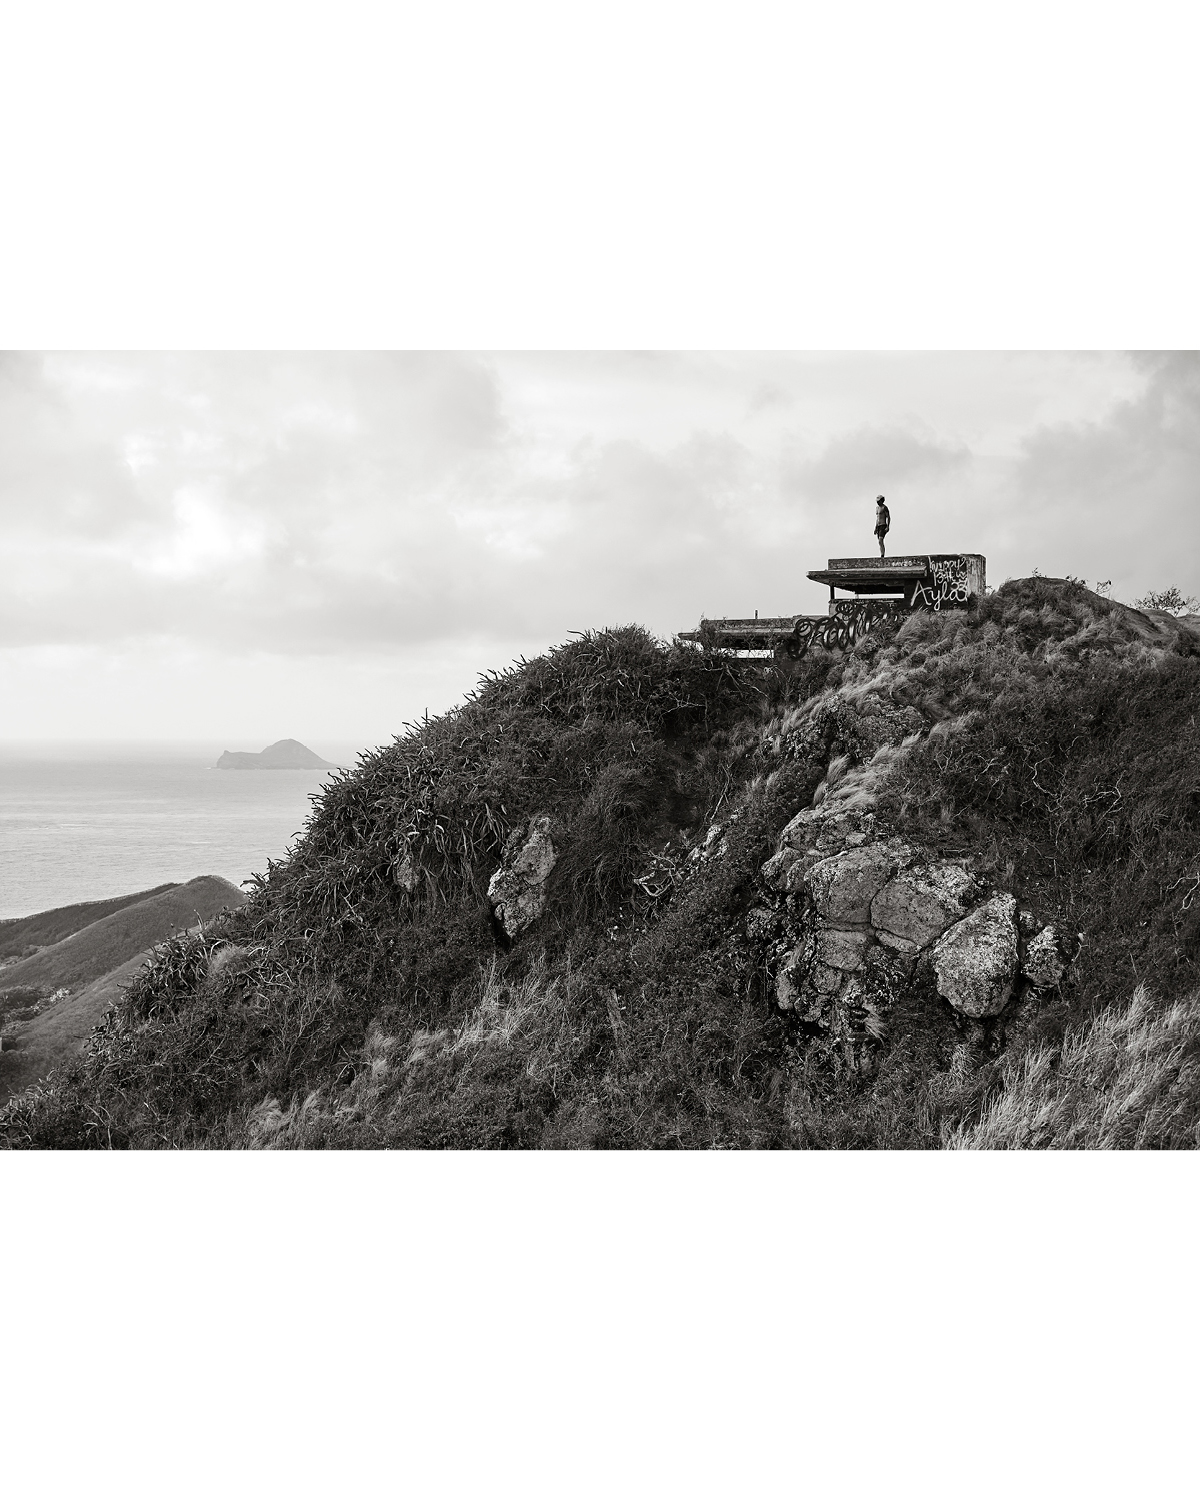  A MORNING RUNNER ON TOP OF PILLBOX TWO 